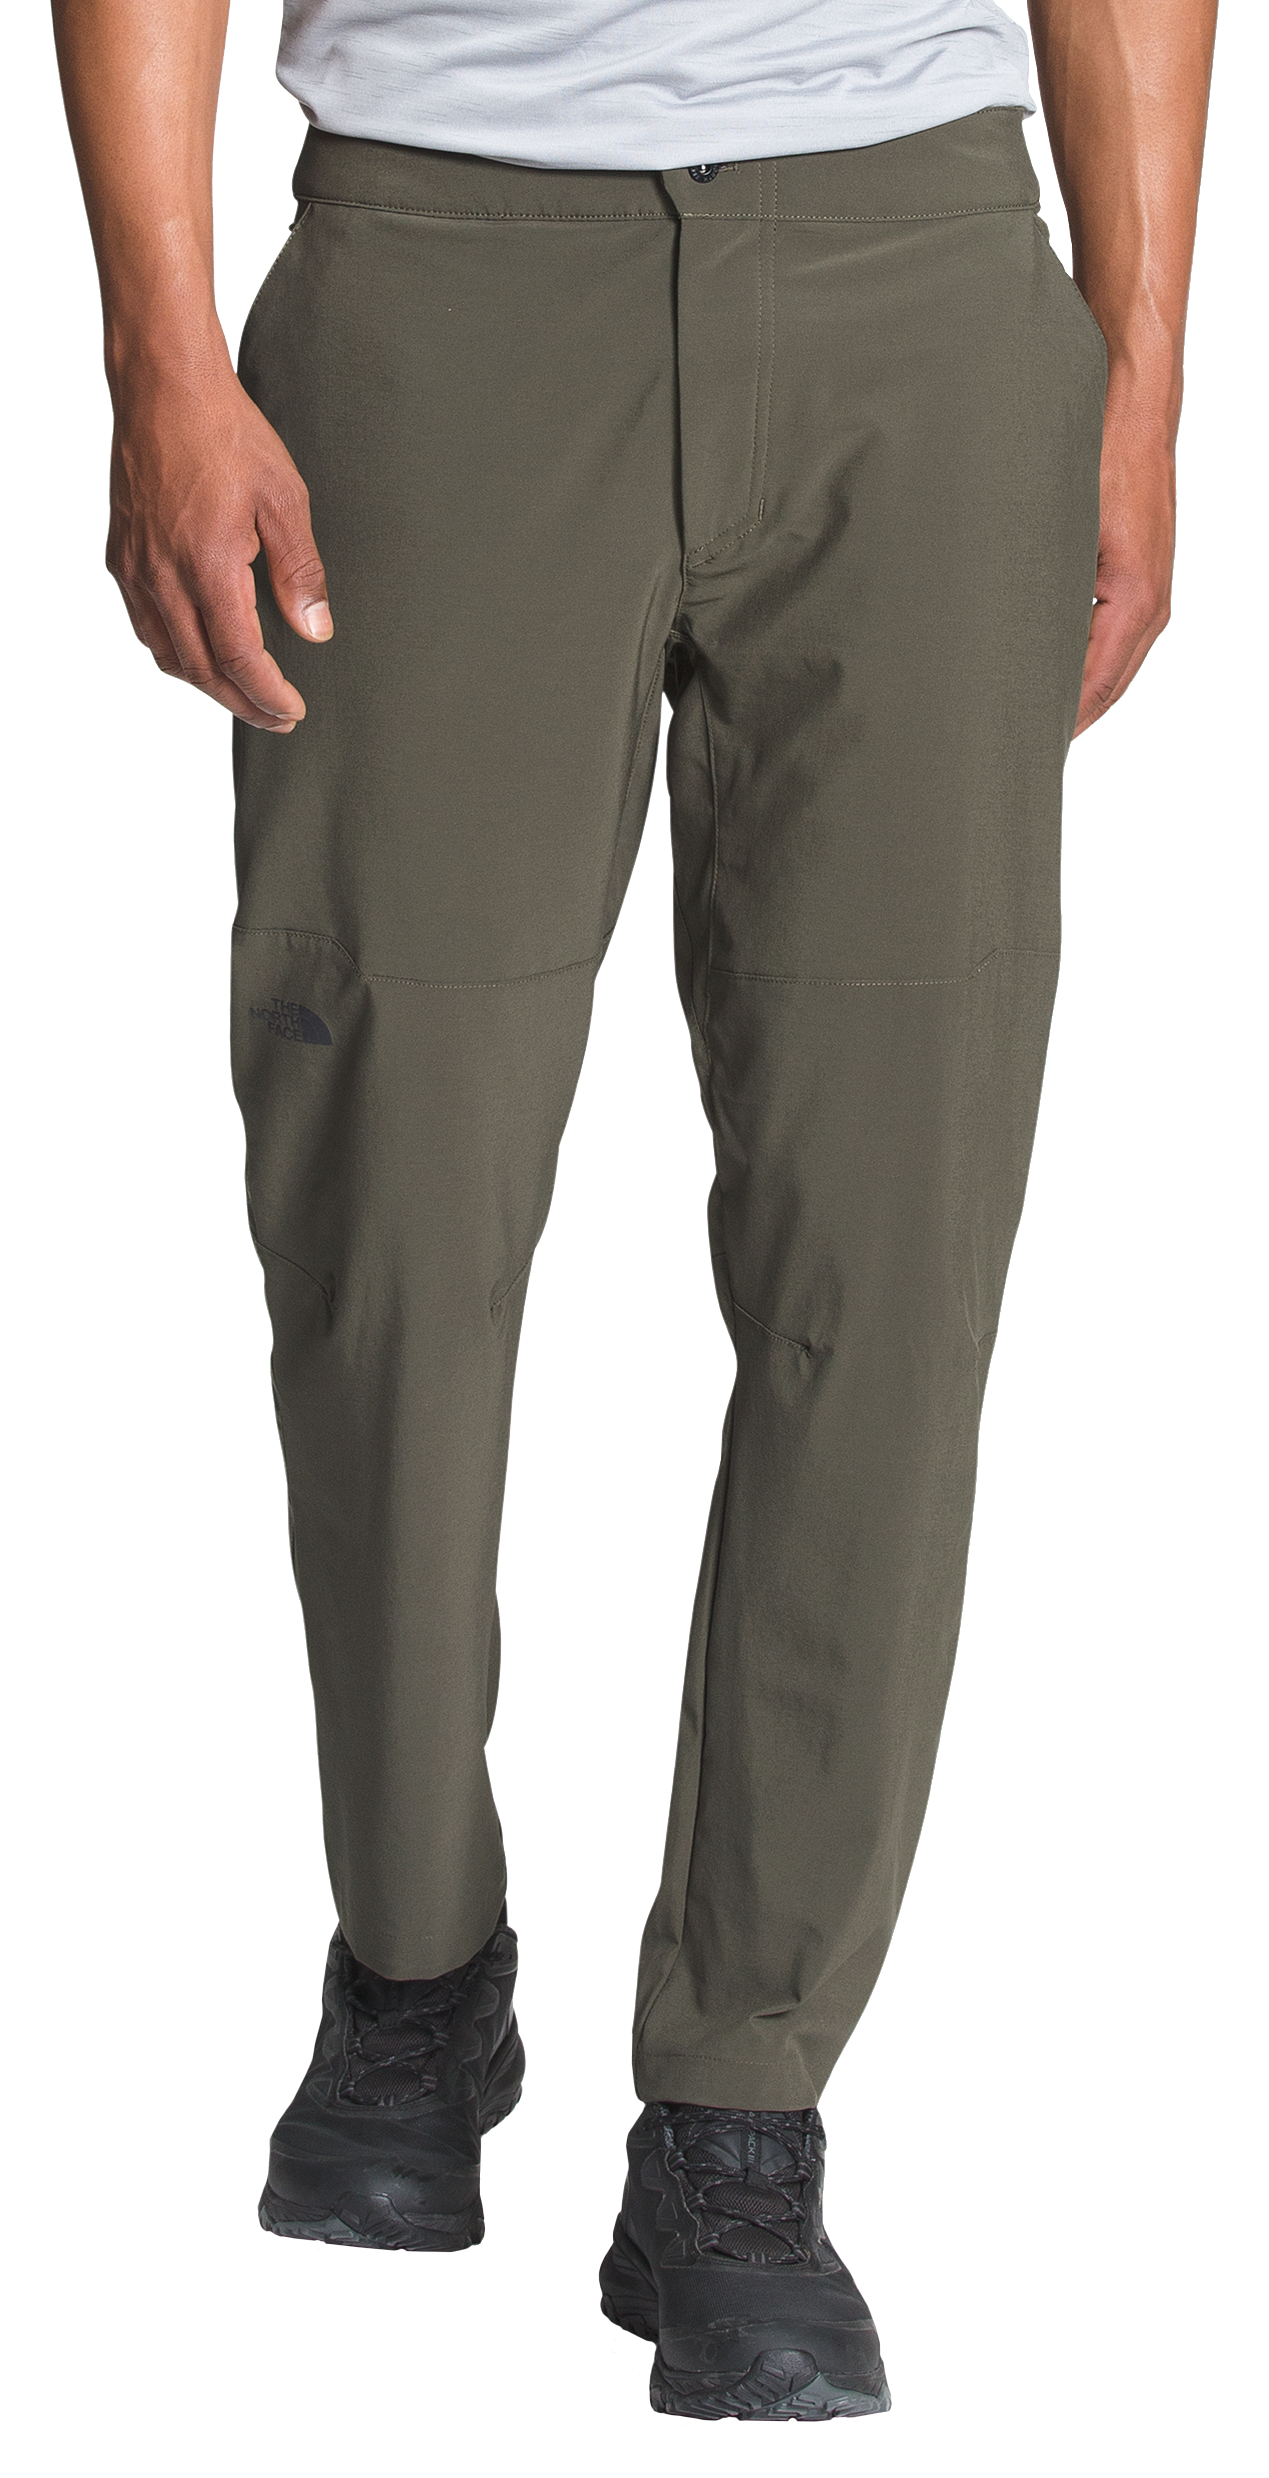 The North Face Paramount Active Pants for Men - New Taupe Green/New Taupe Green - 34 - Short